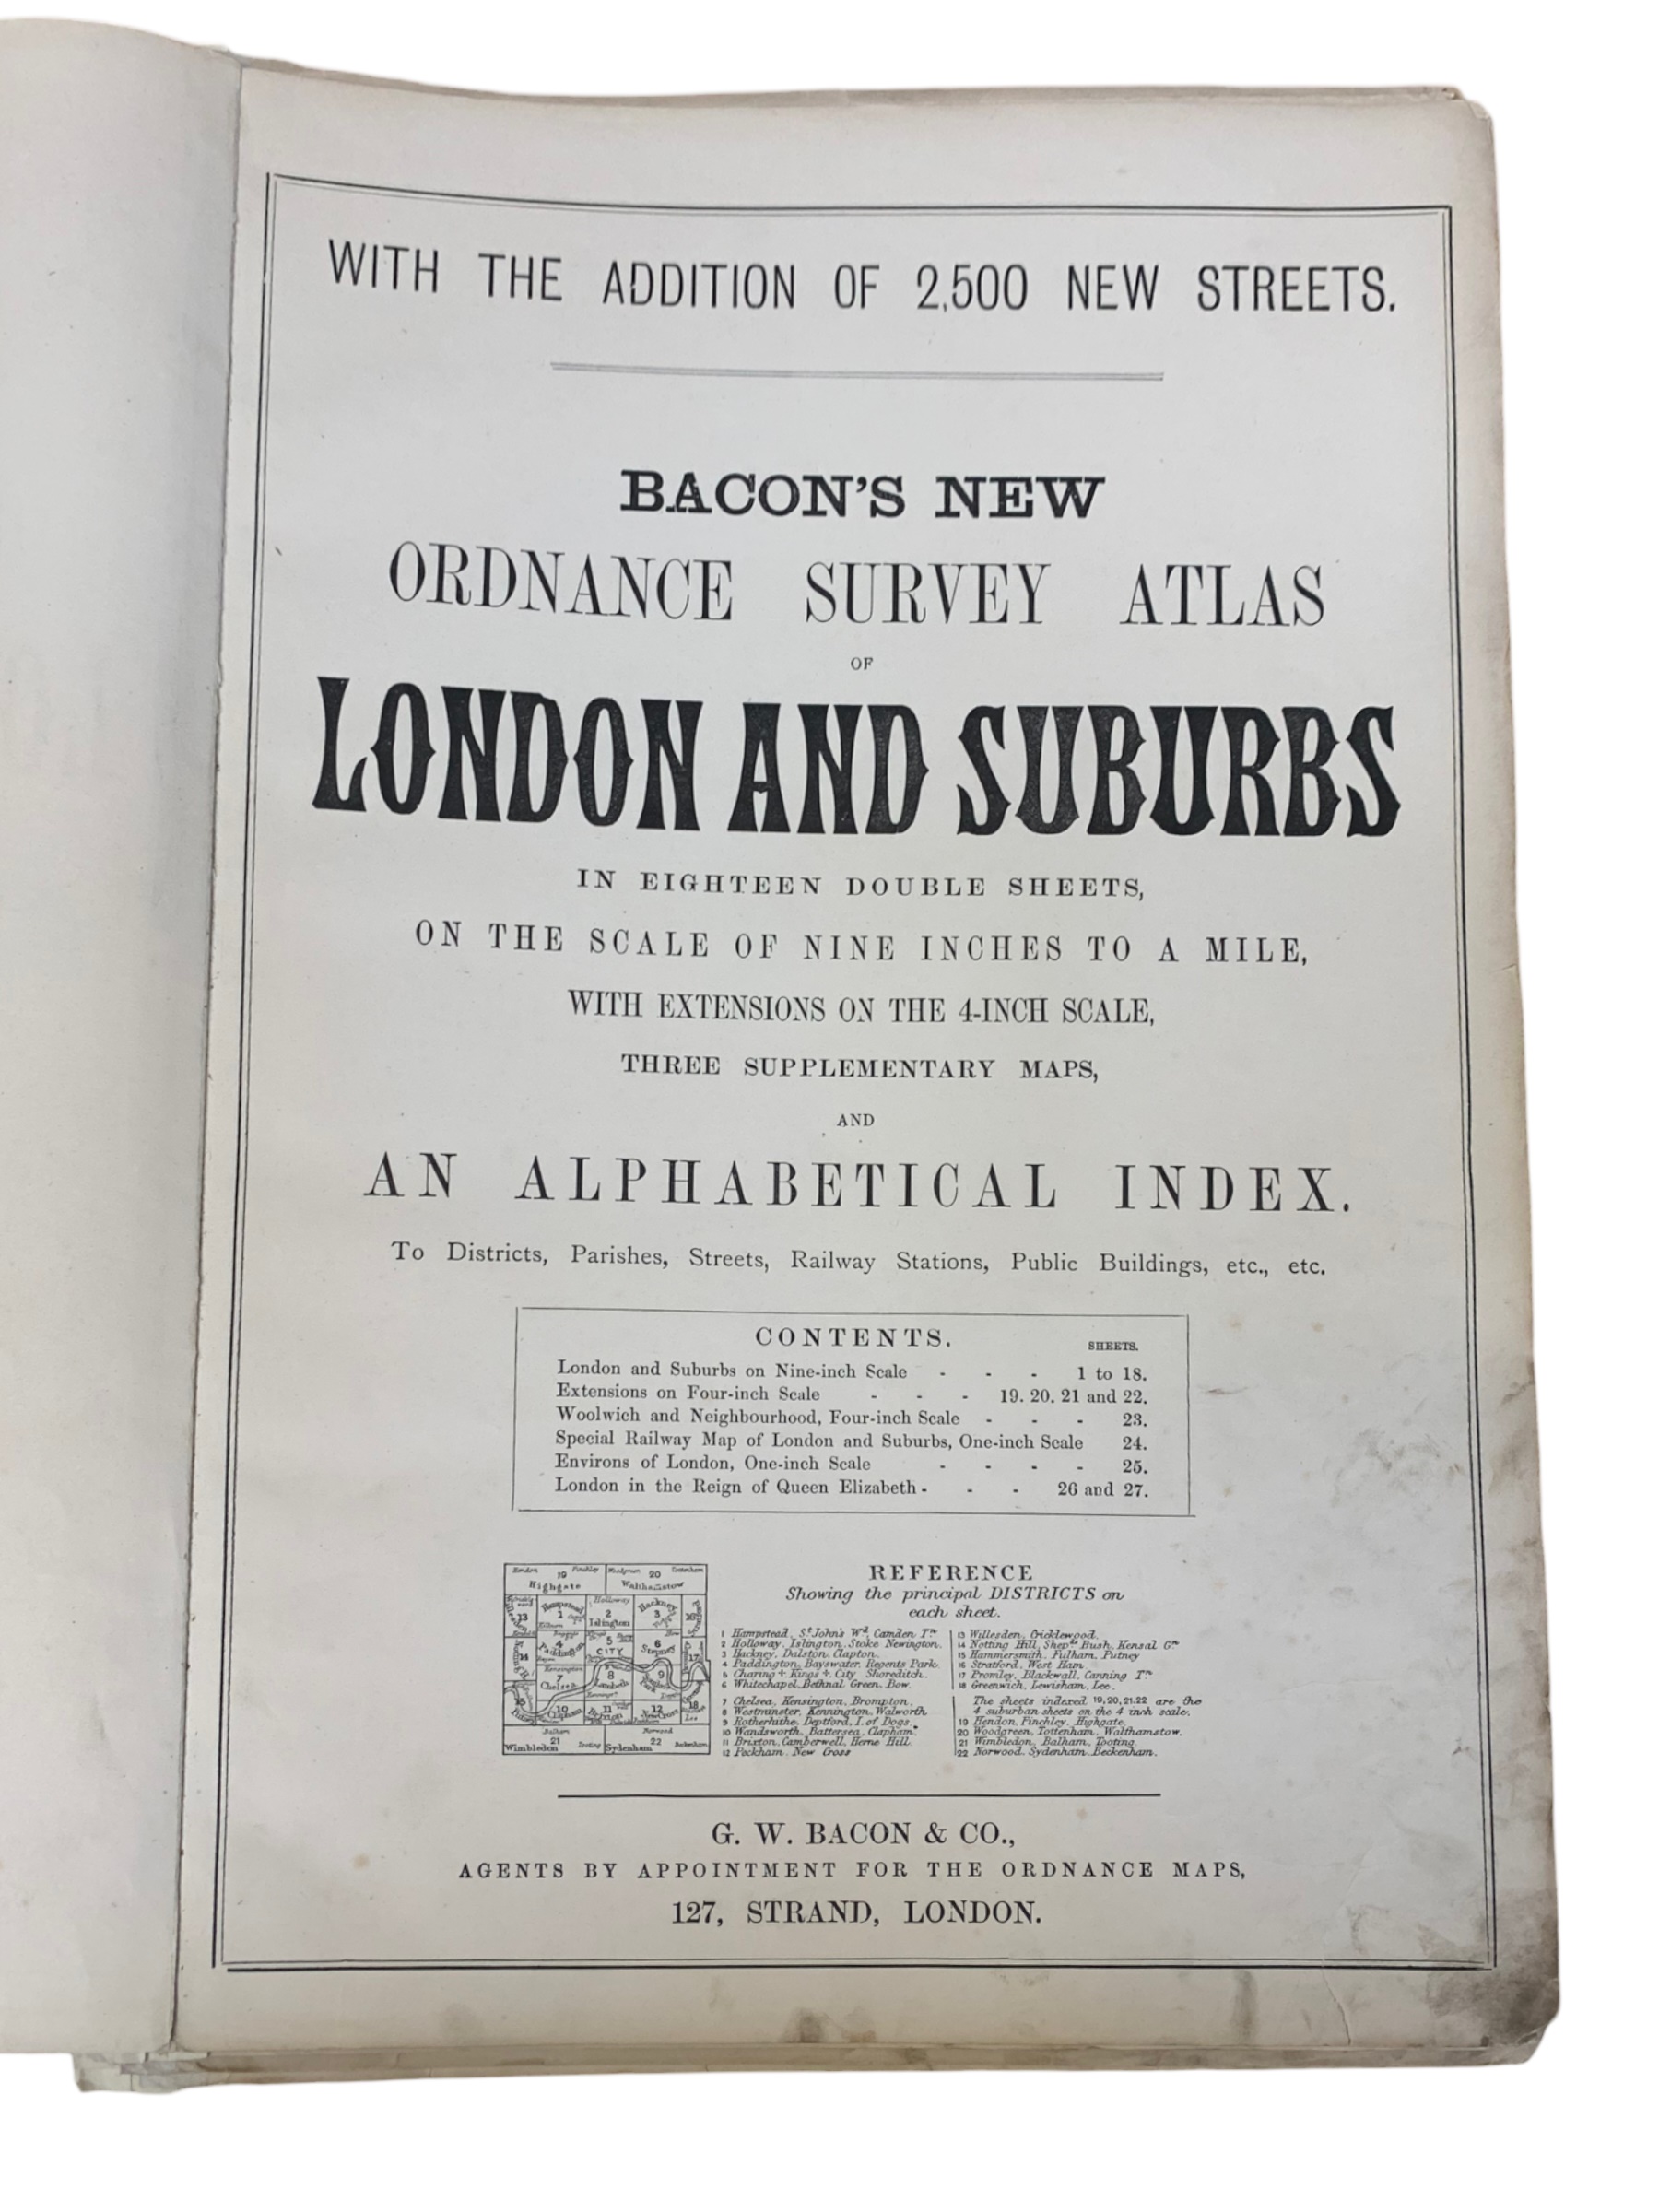 Bacon's New Ordnance Survey Atlas of London and Suburbs, c. 1880 - Image 3 of 7